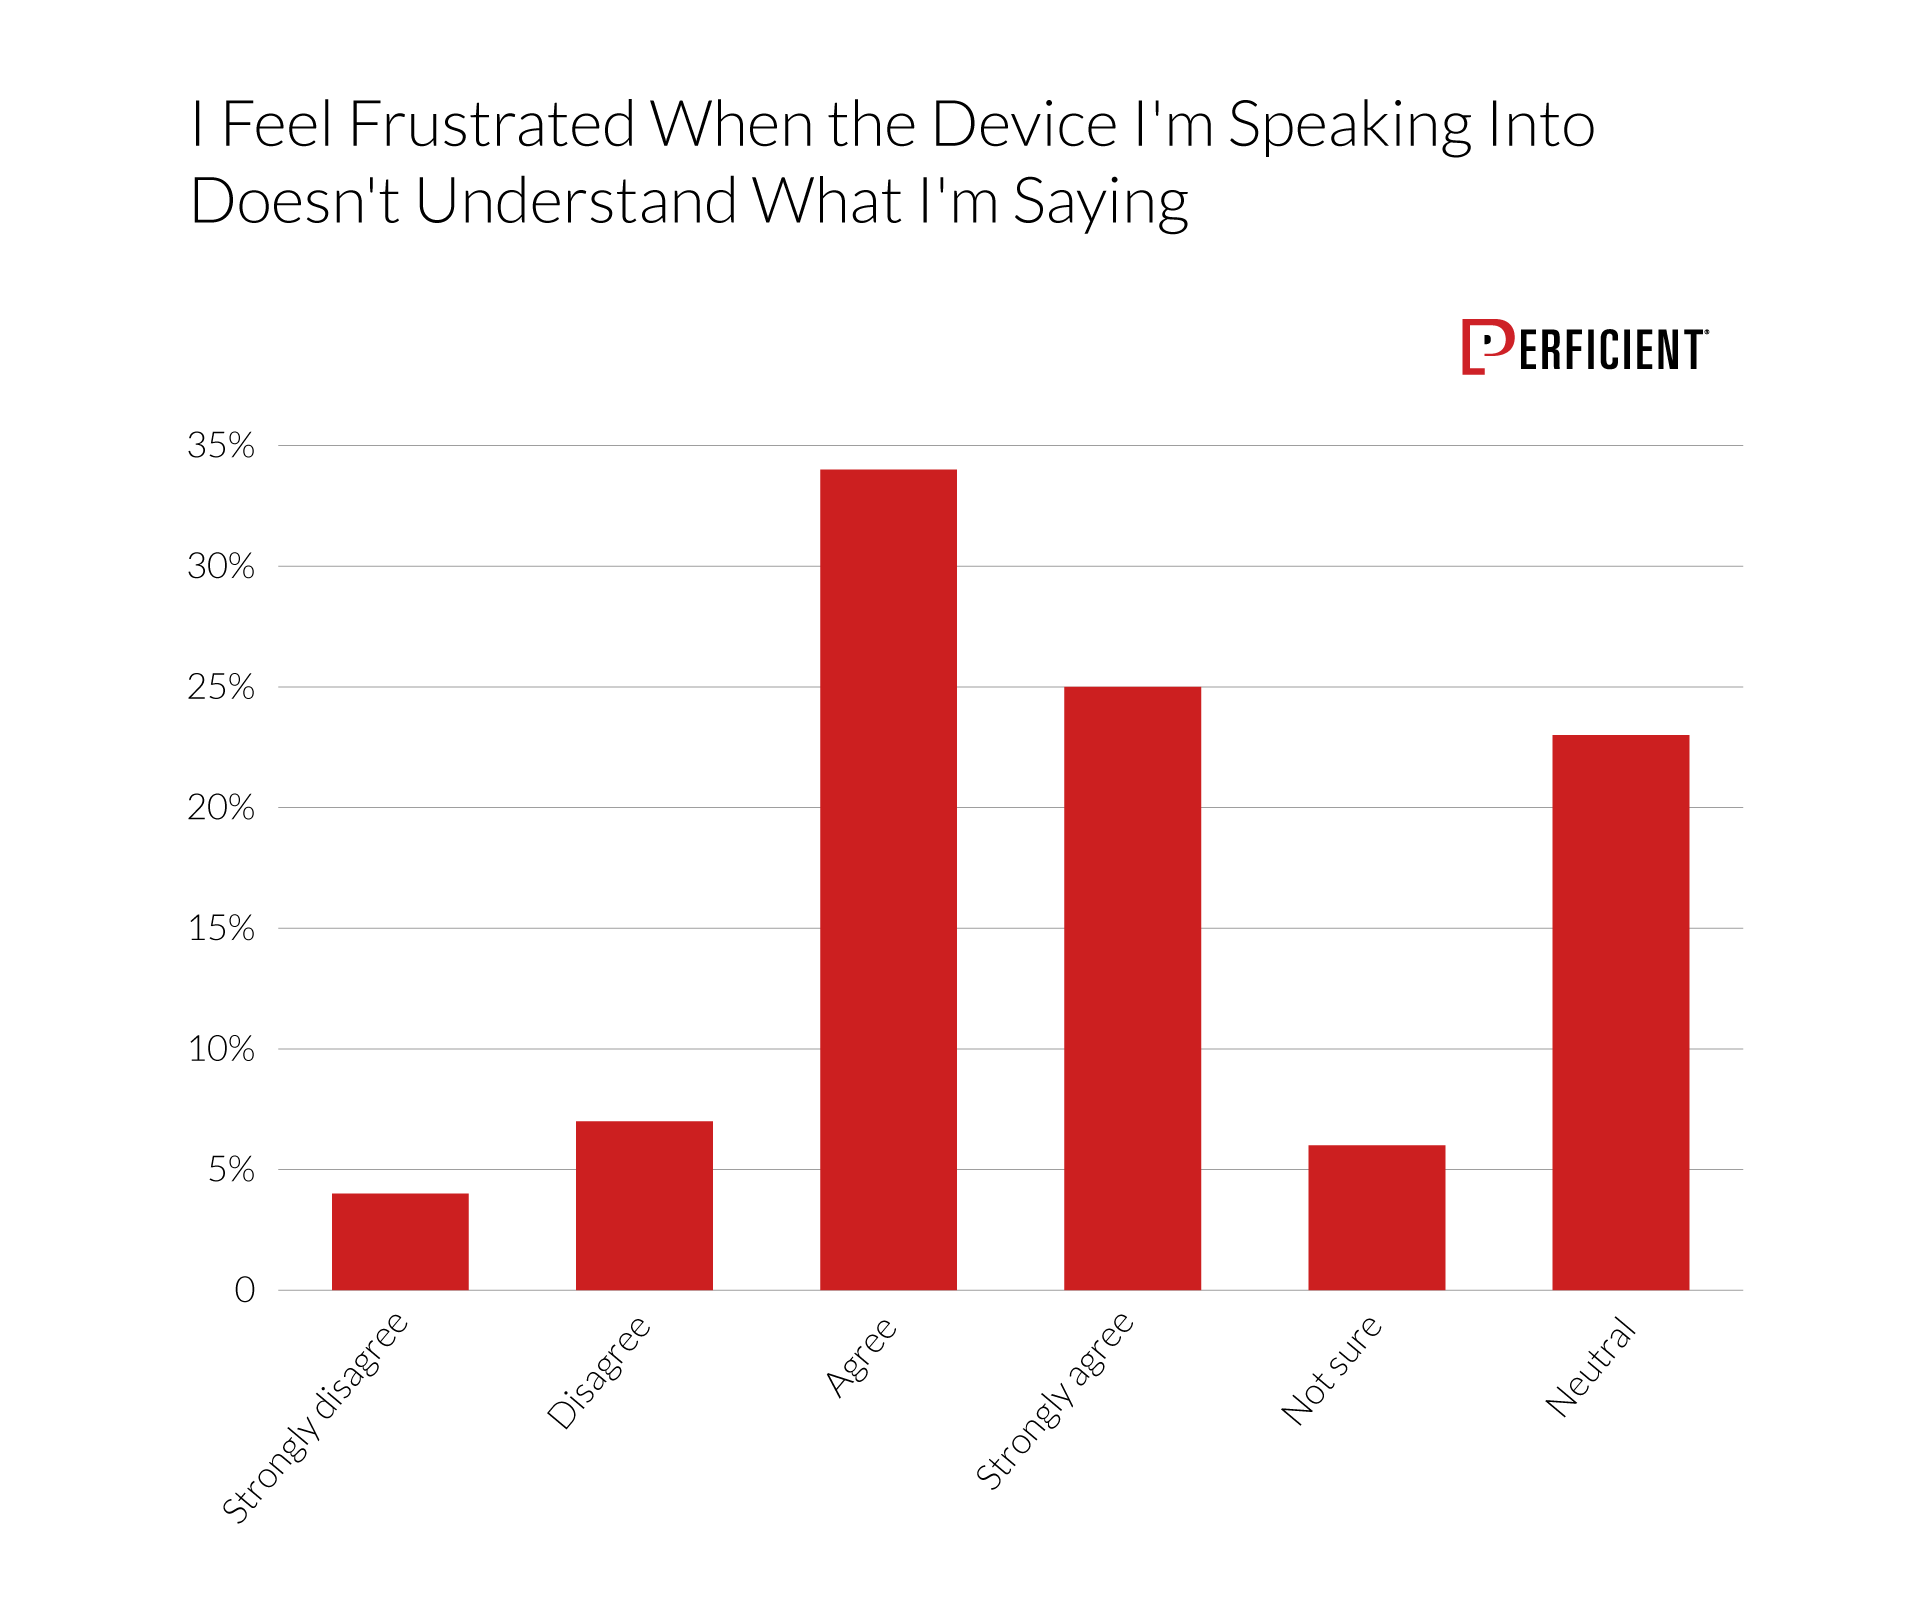 Users agree that they get frustrated when their device doesn't recognize what they've said